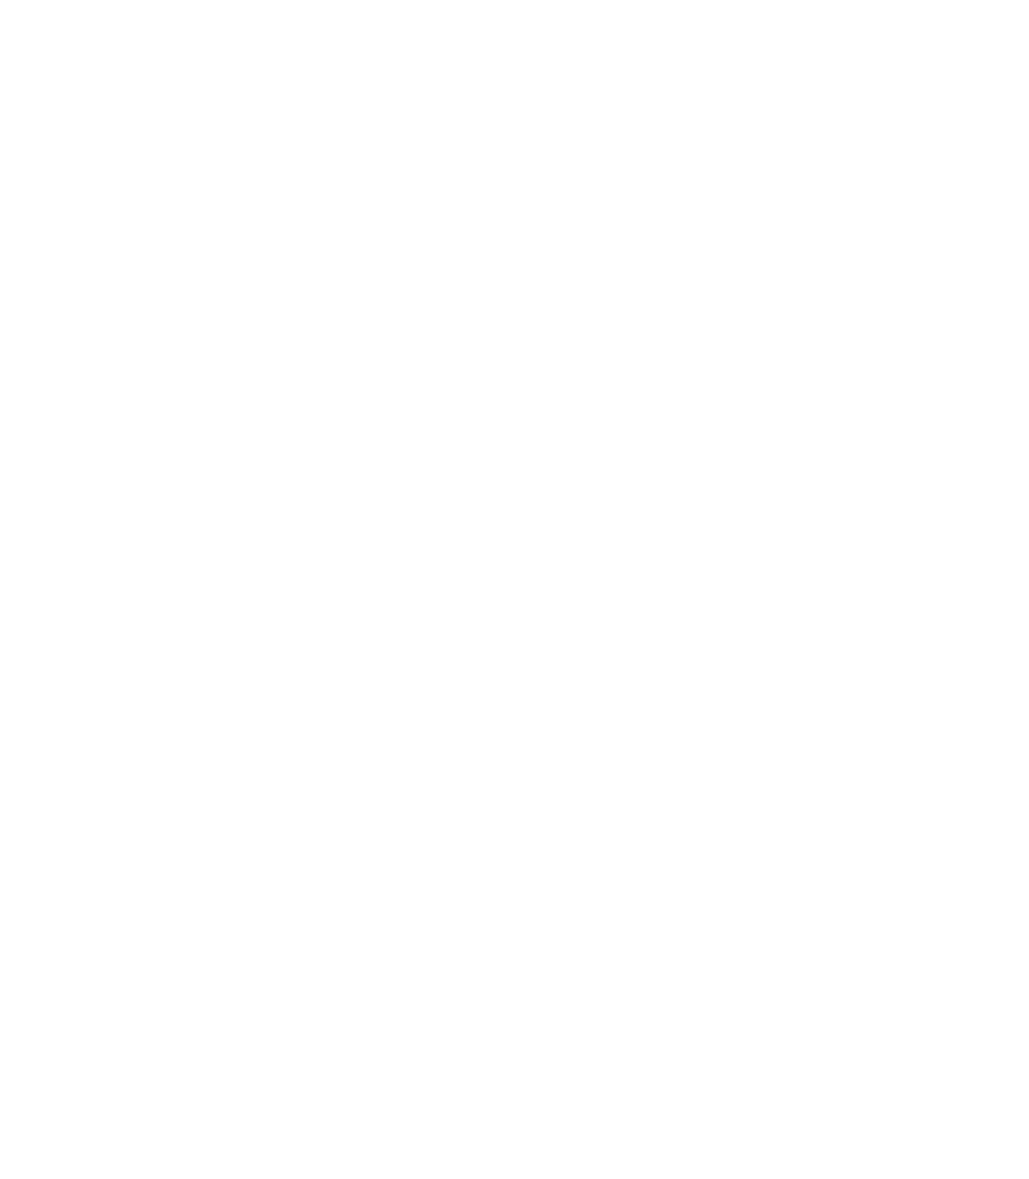 Hotel SLO Footer Logo in first column of footer element at bottom of the page.